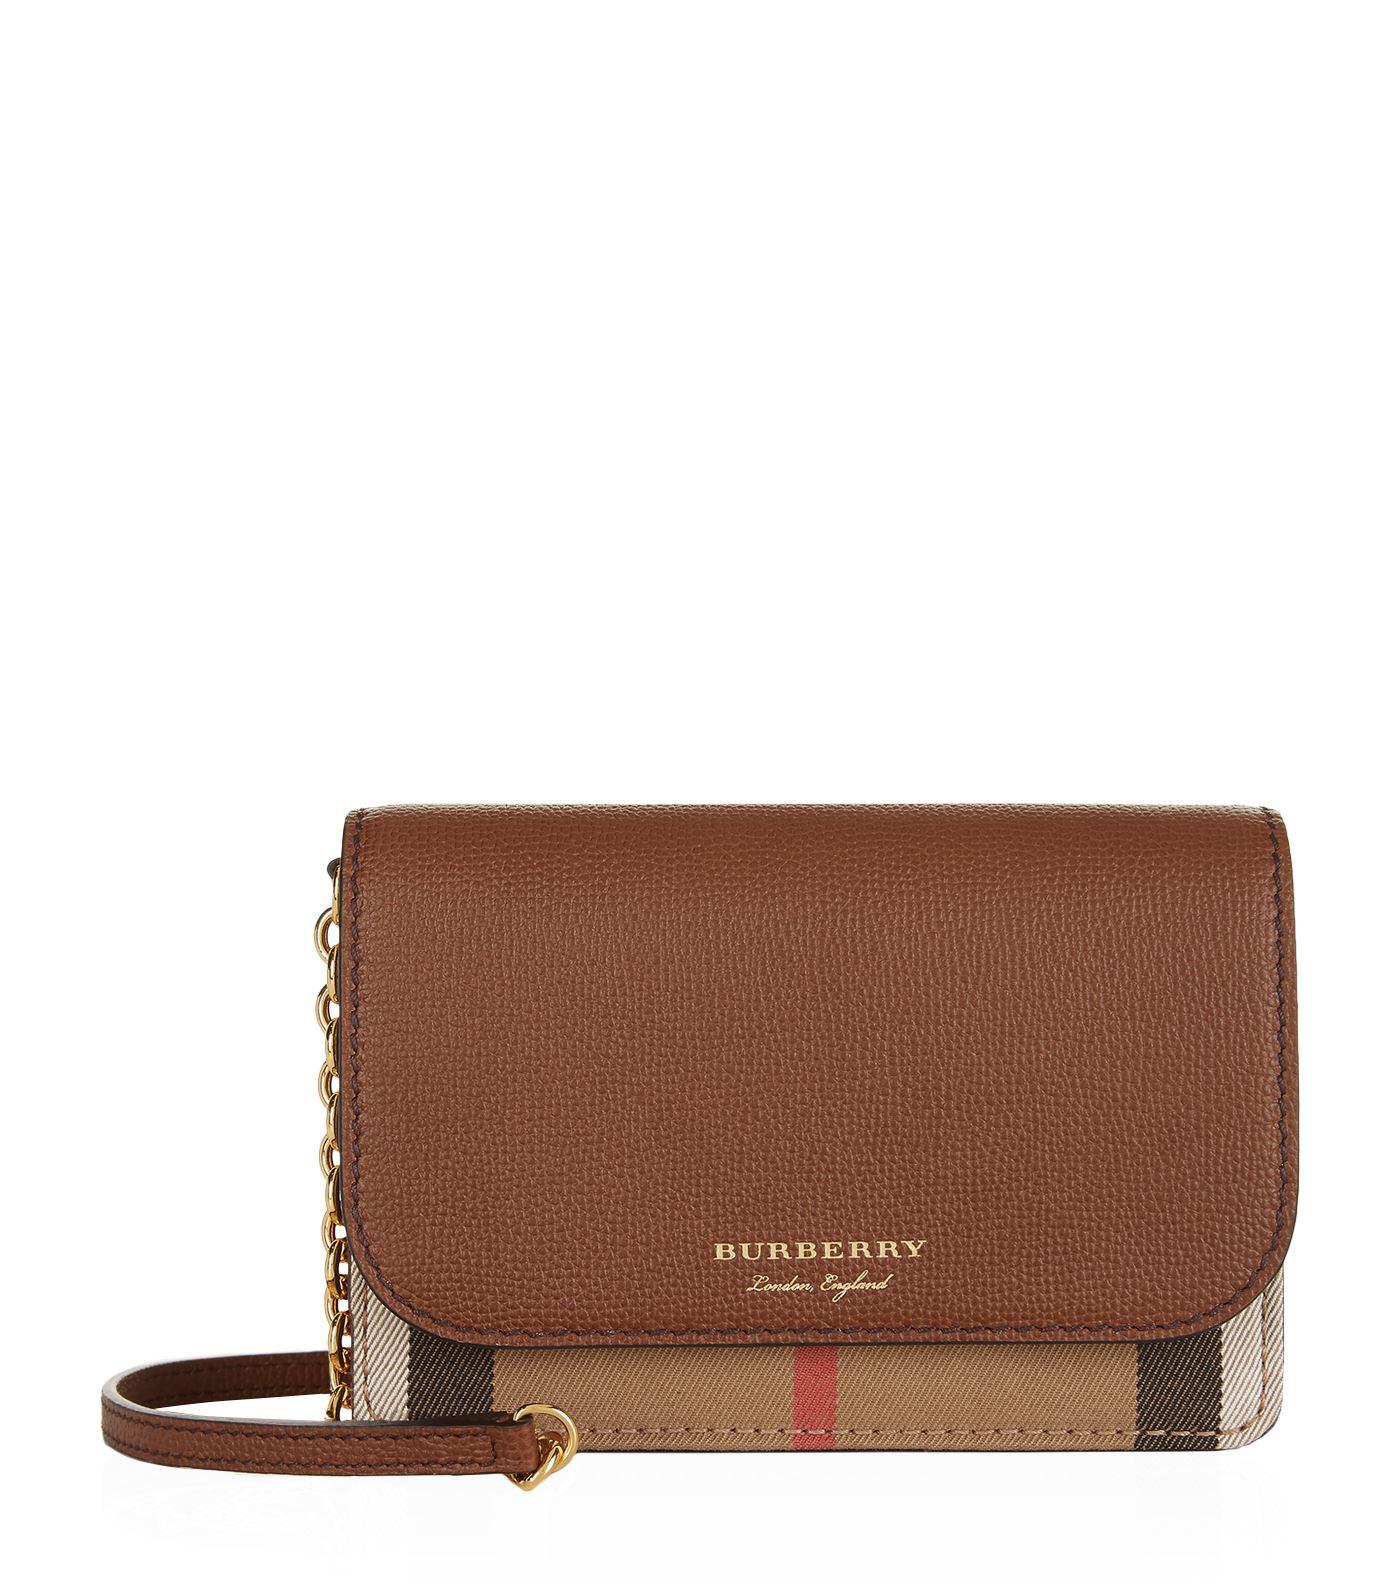 Burberry Hampshire Cross Body Bag in Brown | Lyst